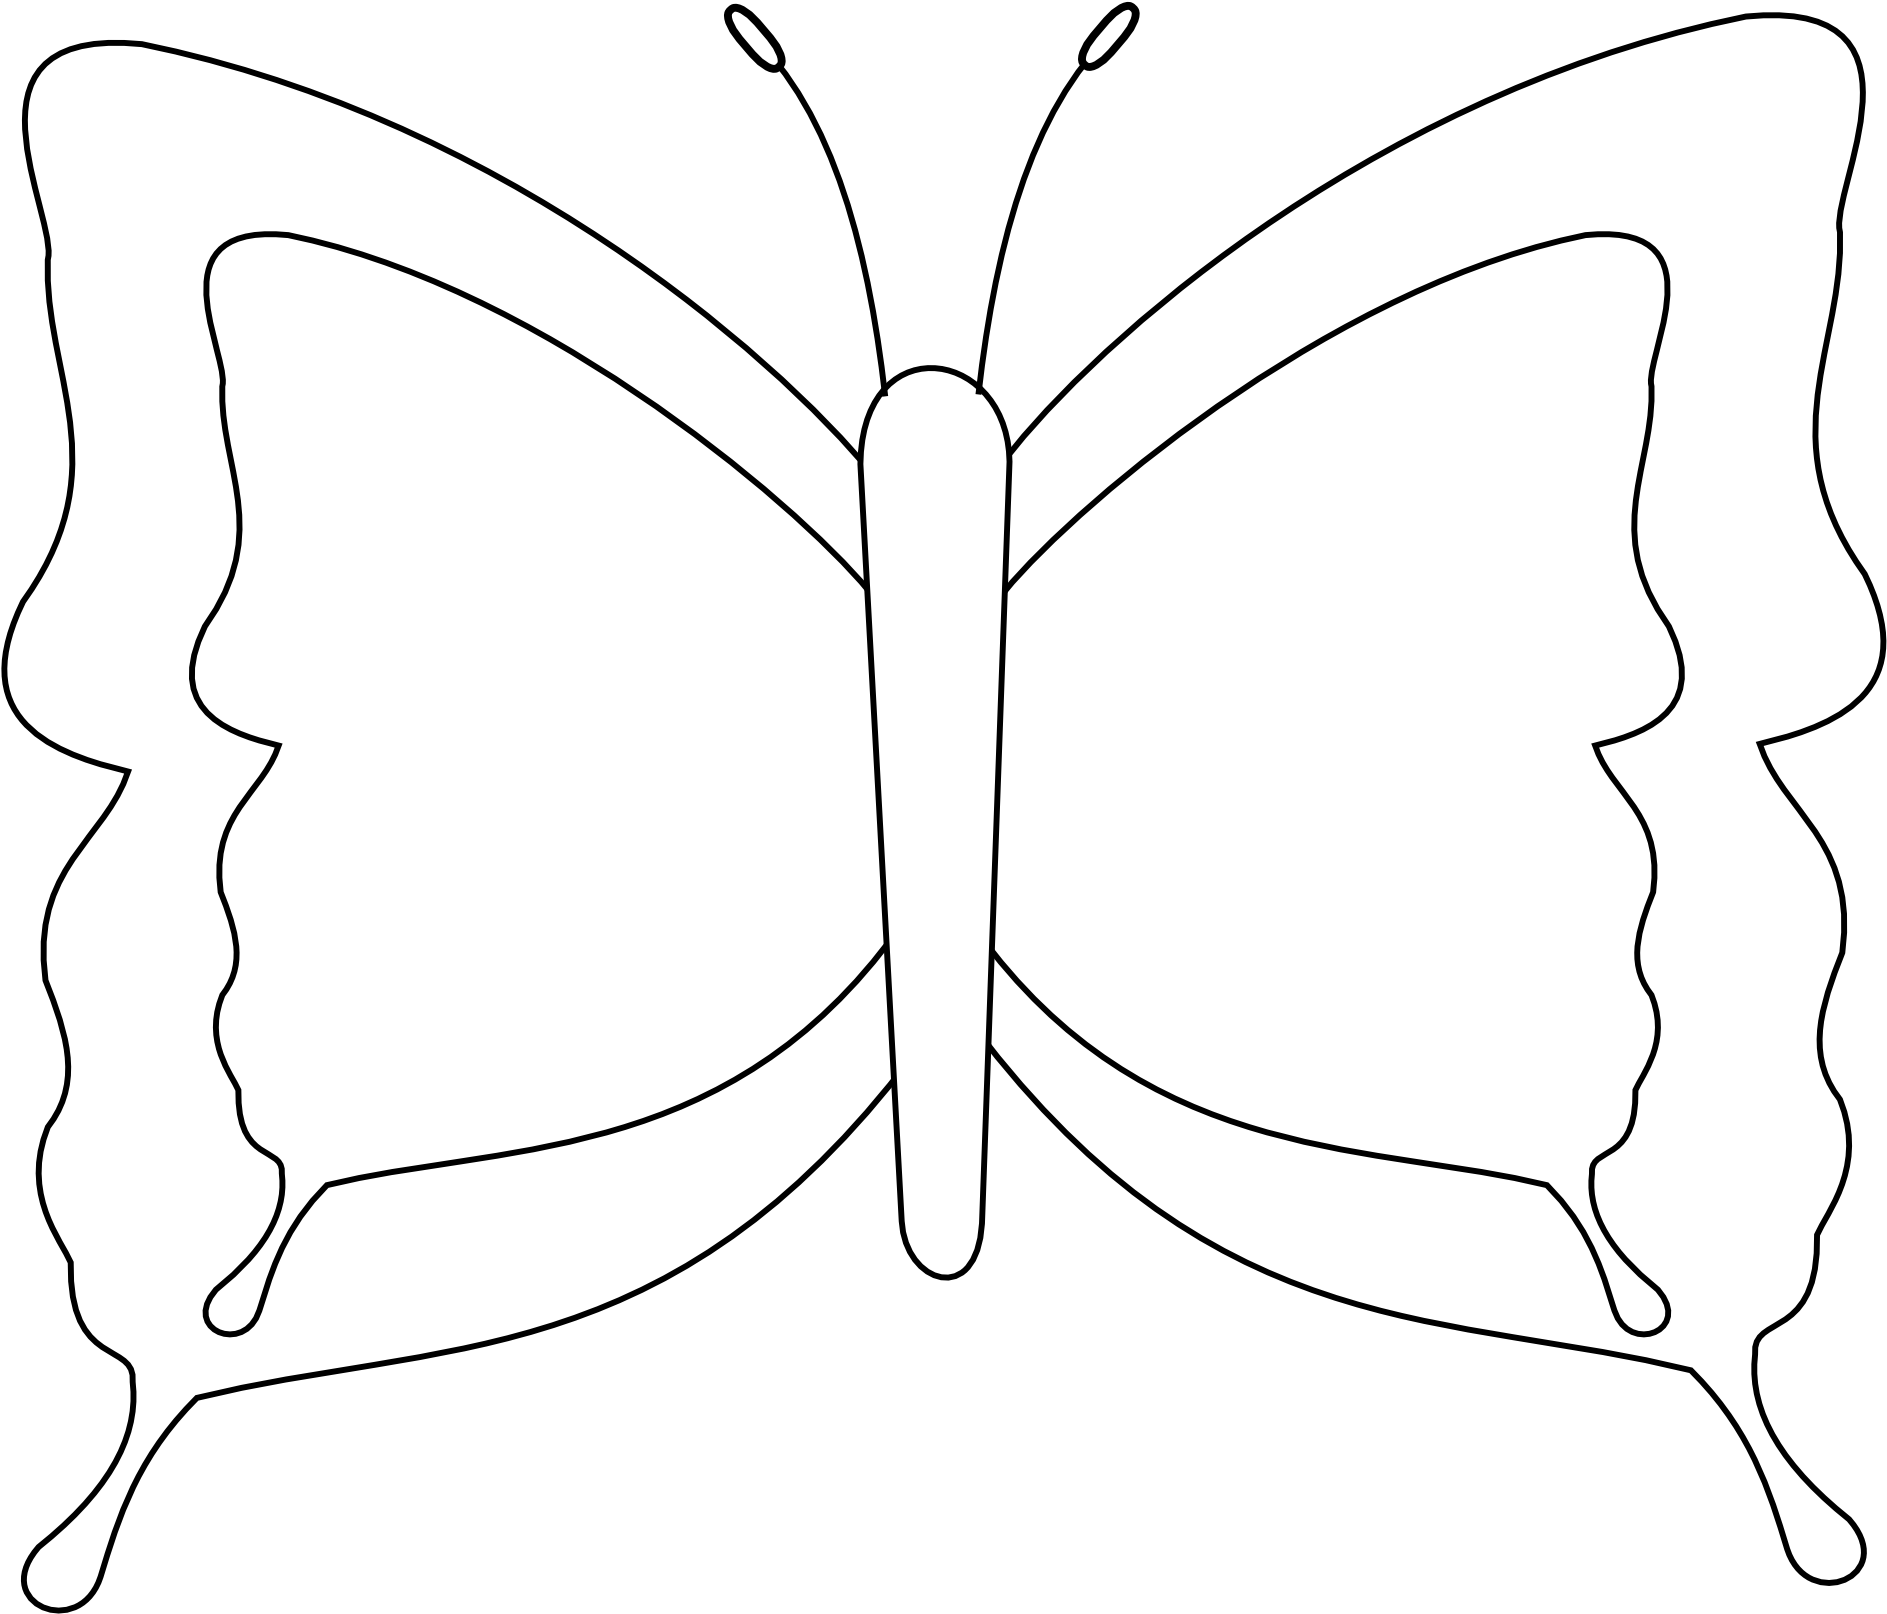 Monochrome_ Butterfly_ Outline